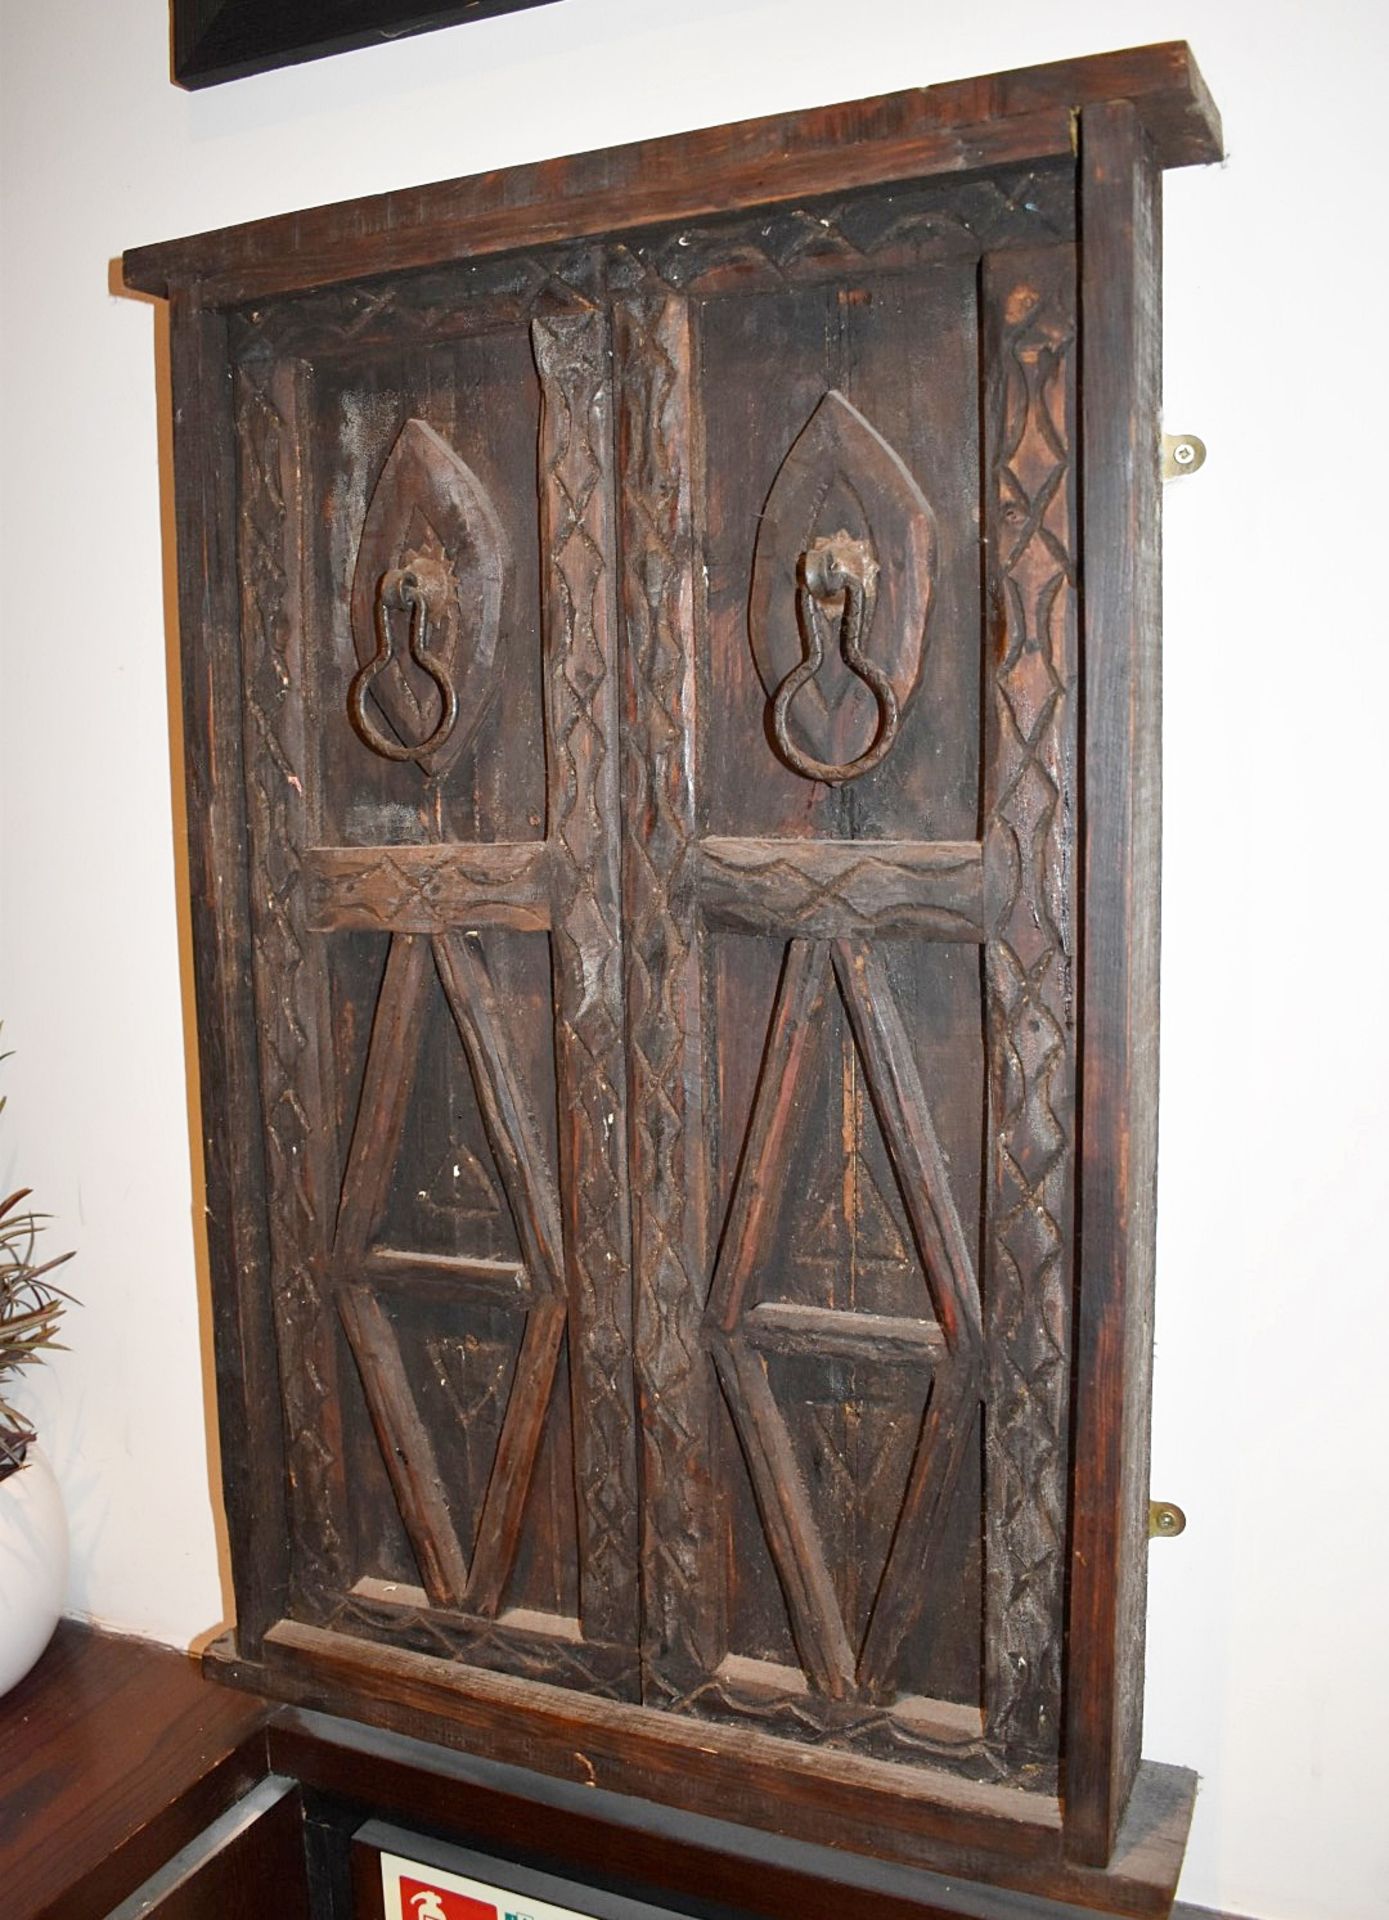 2 x Pairs Of Ornate Wooden Wall-mounted Hand-Carved Rustic Pantry Doors - Image 2 of 2